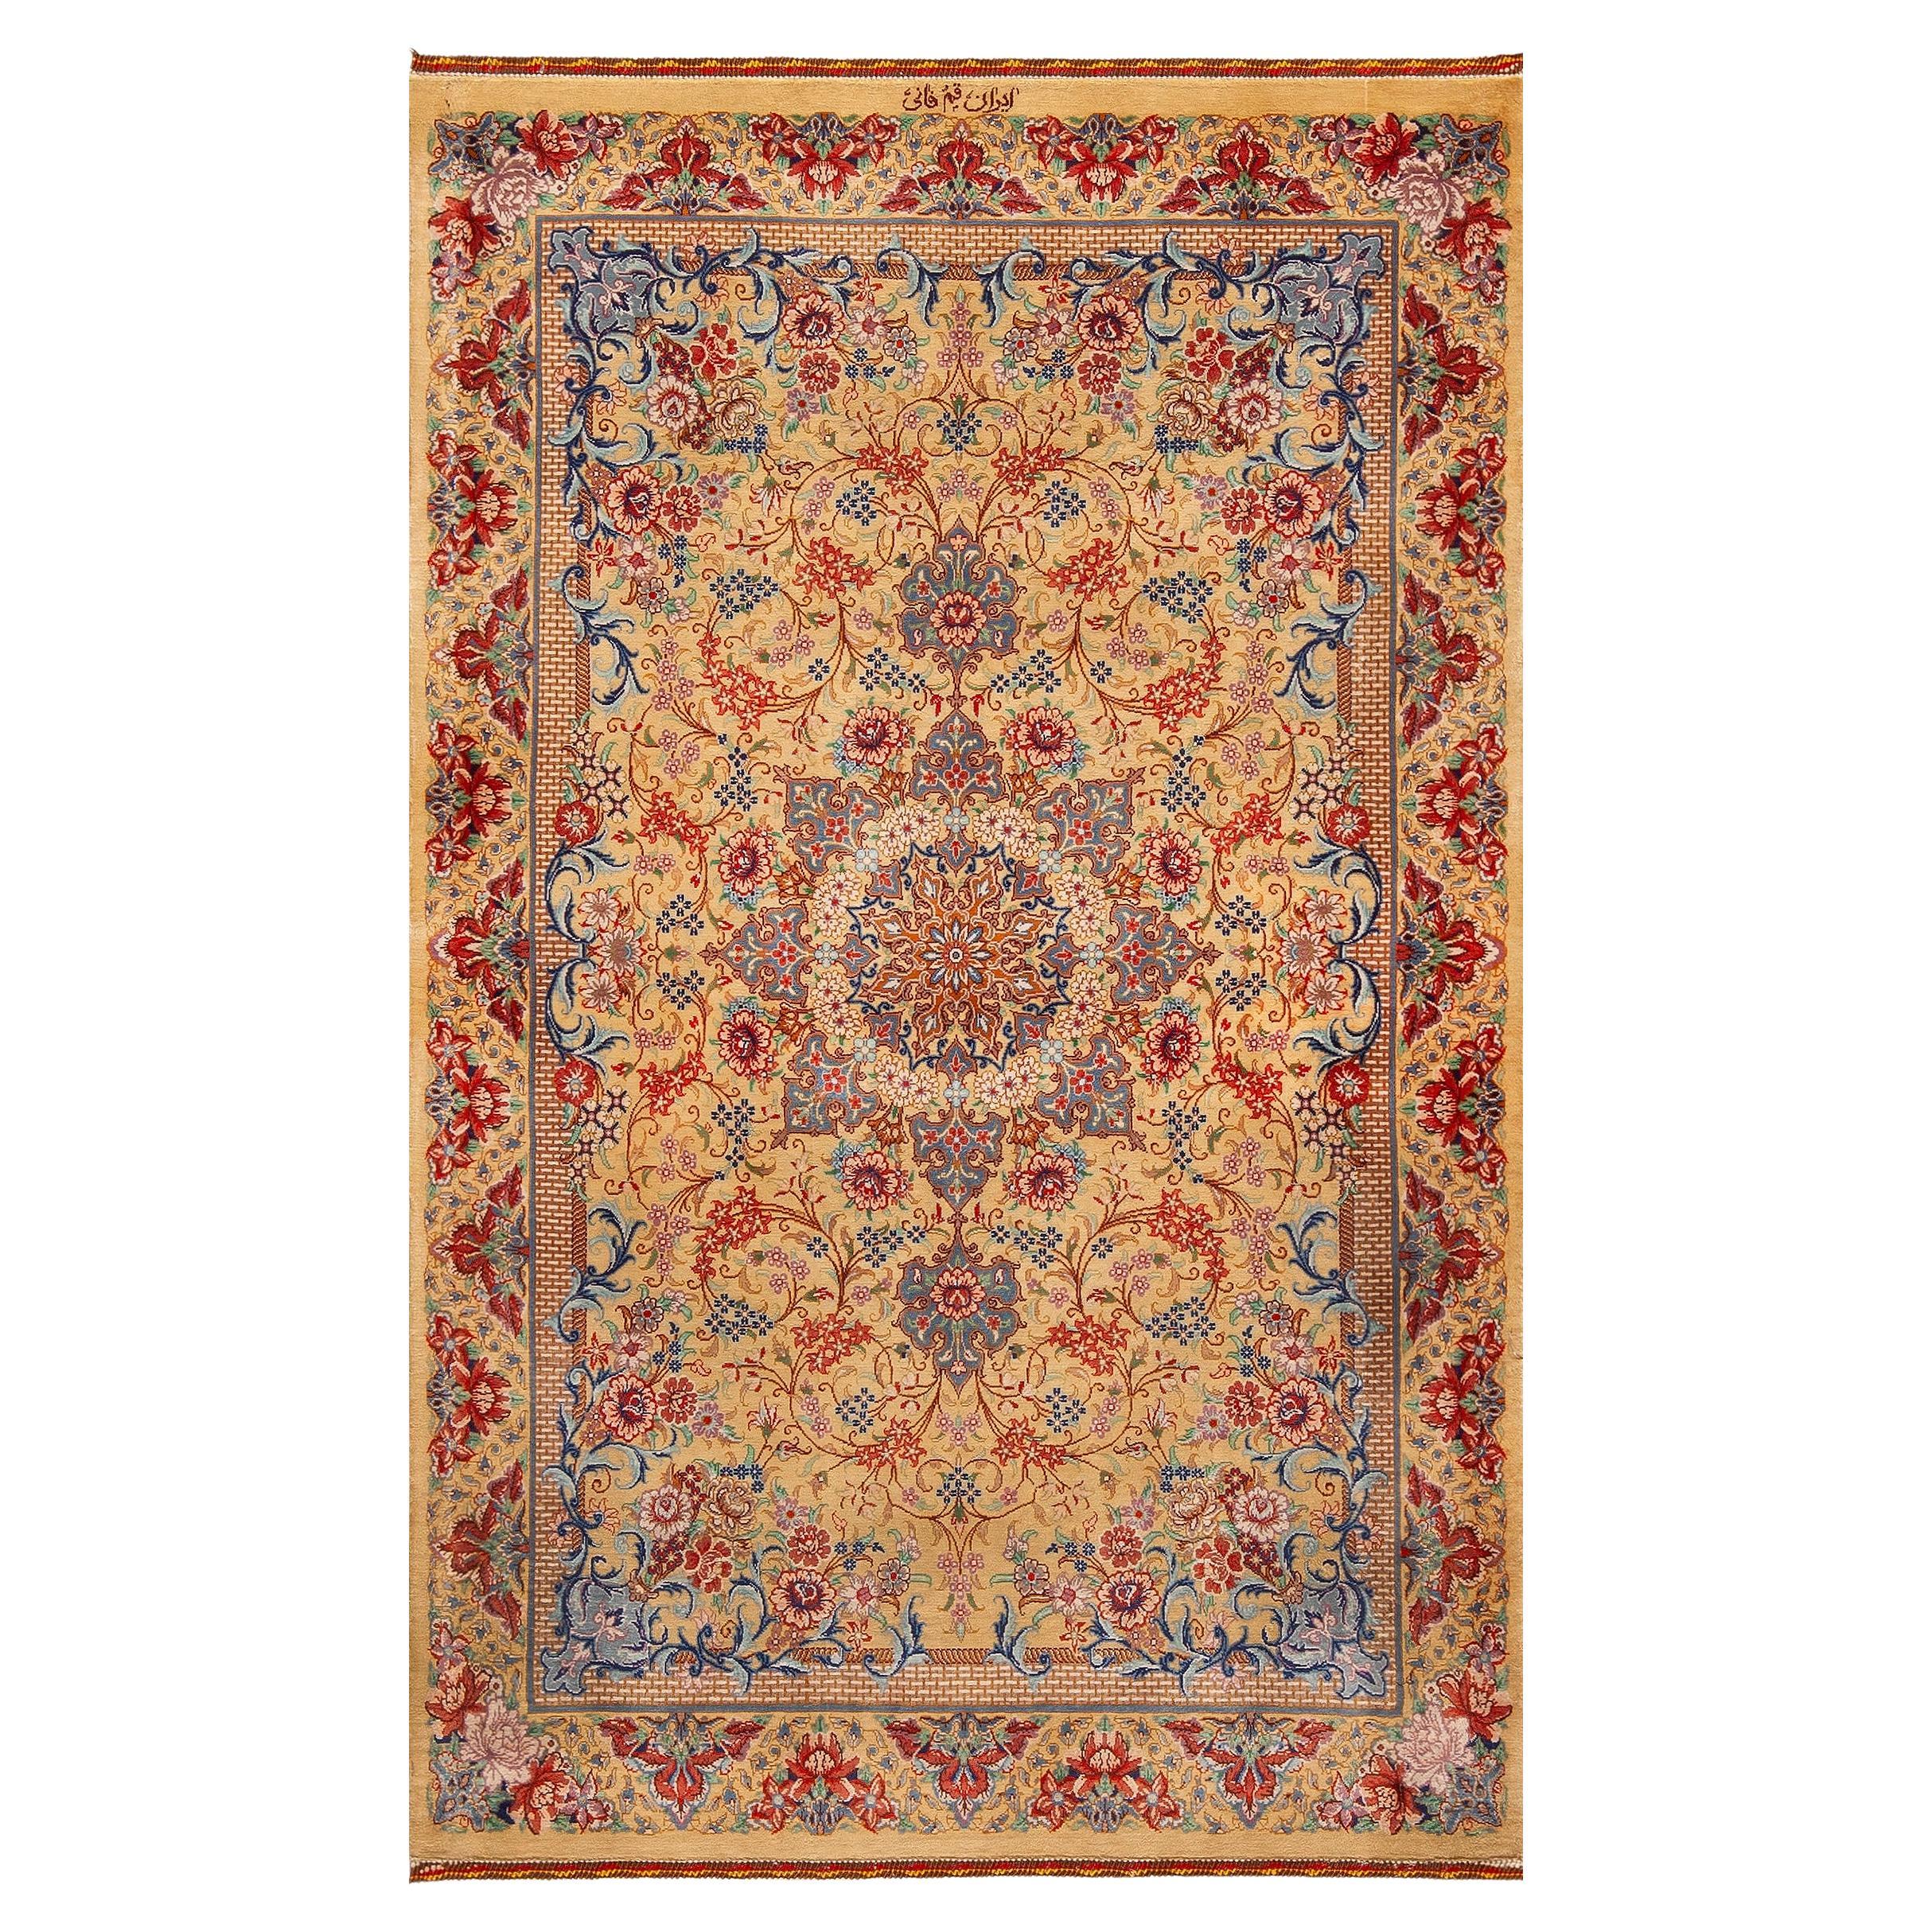 Fine Artistic Small Floral Vintage Luxurious Persian Silk Qum Rug 2'6" x 4' For Sale